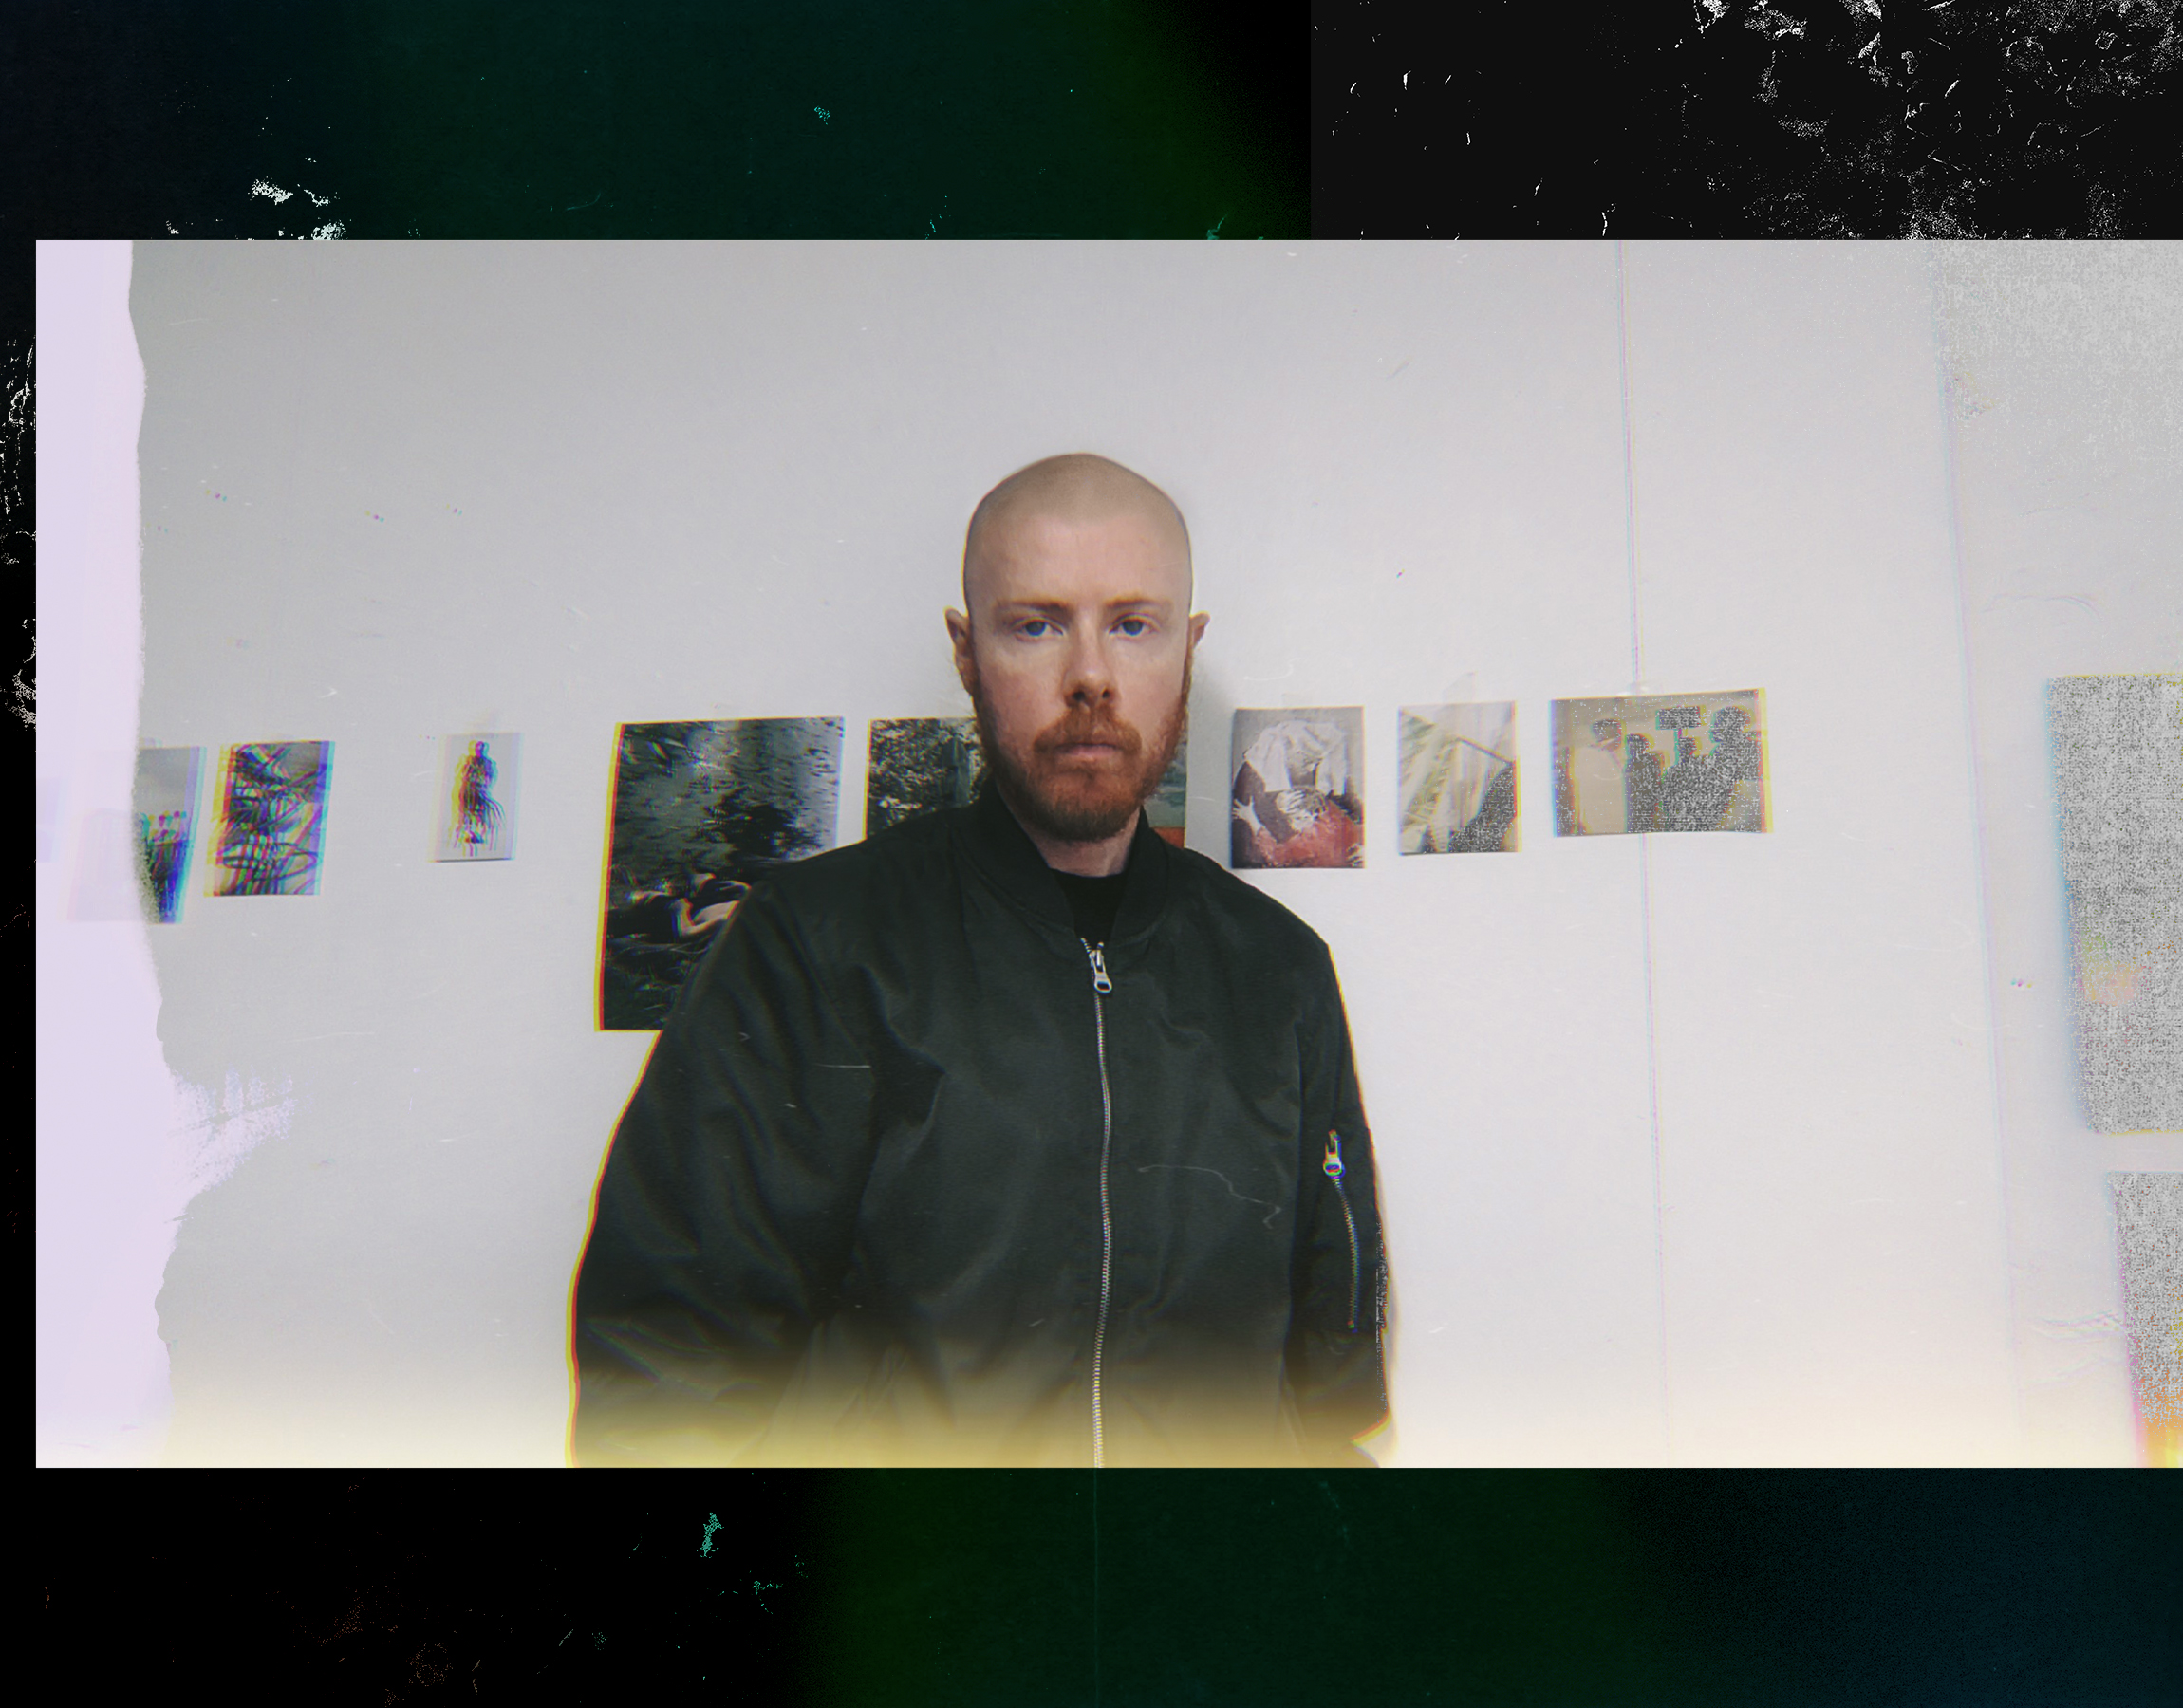 Forest Swords | „With every record I want to create a world for people to feel fully immersed into.”